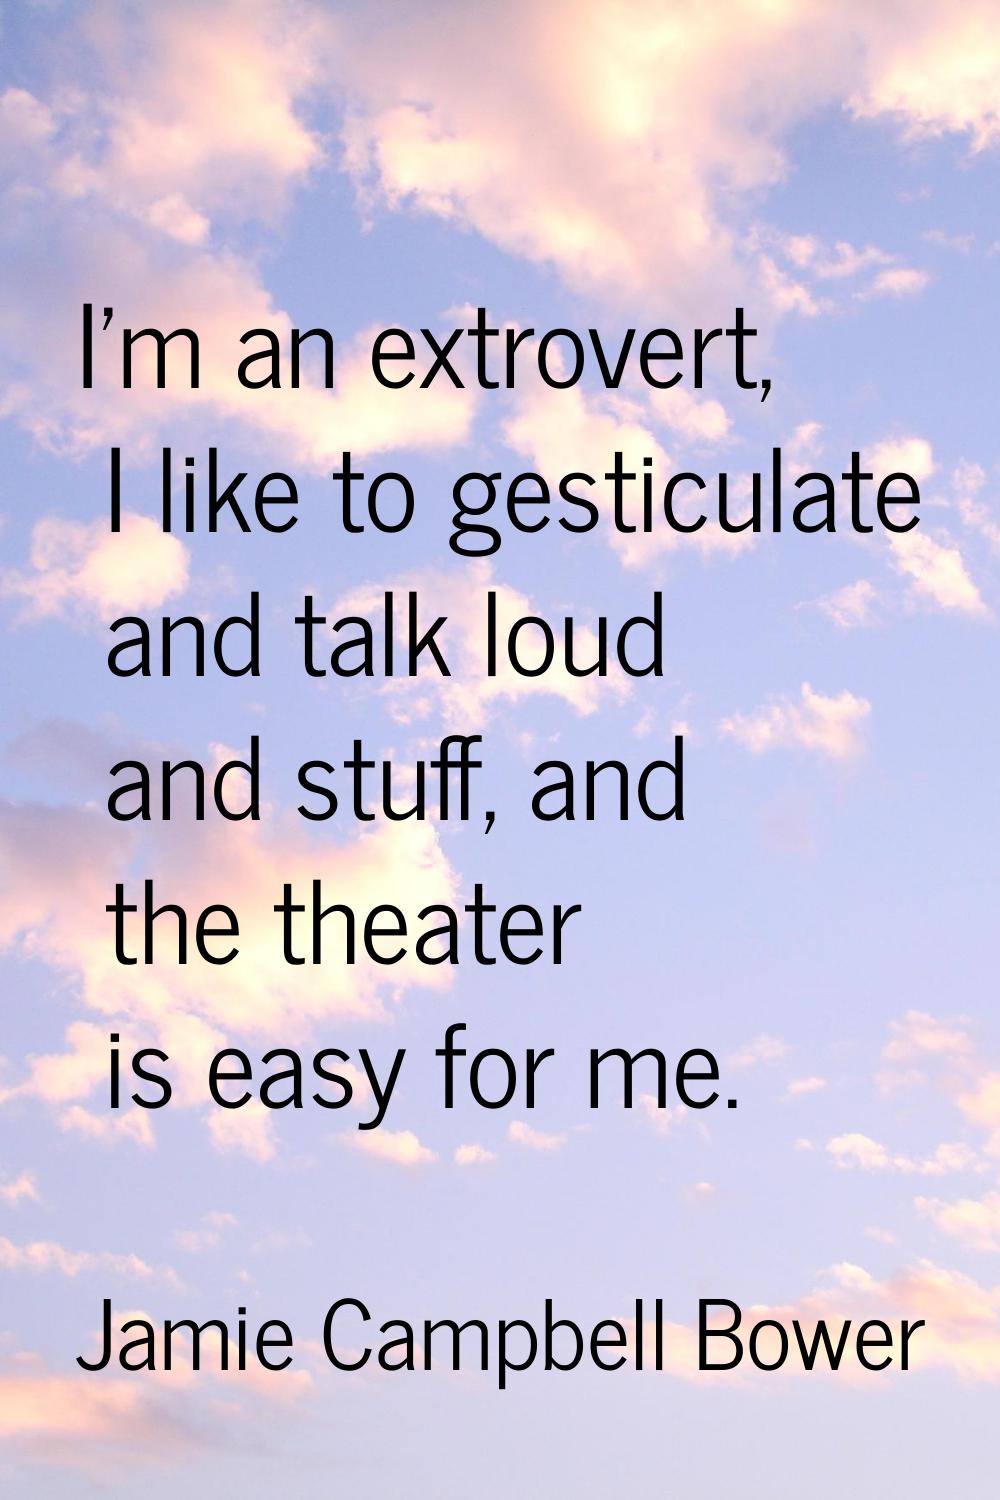 I'm an extrovert, I like to gesticulate and talk loud and stuff, and the theater is easy for me.